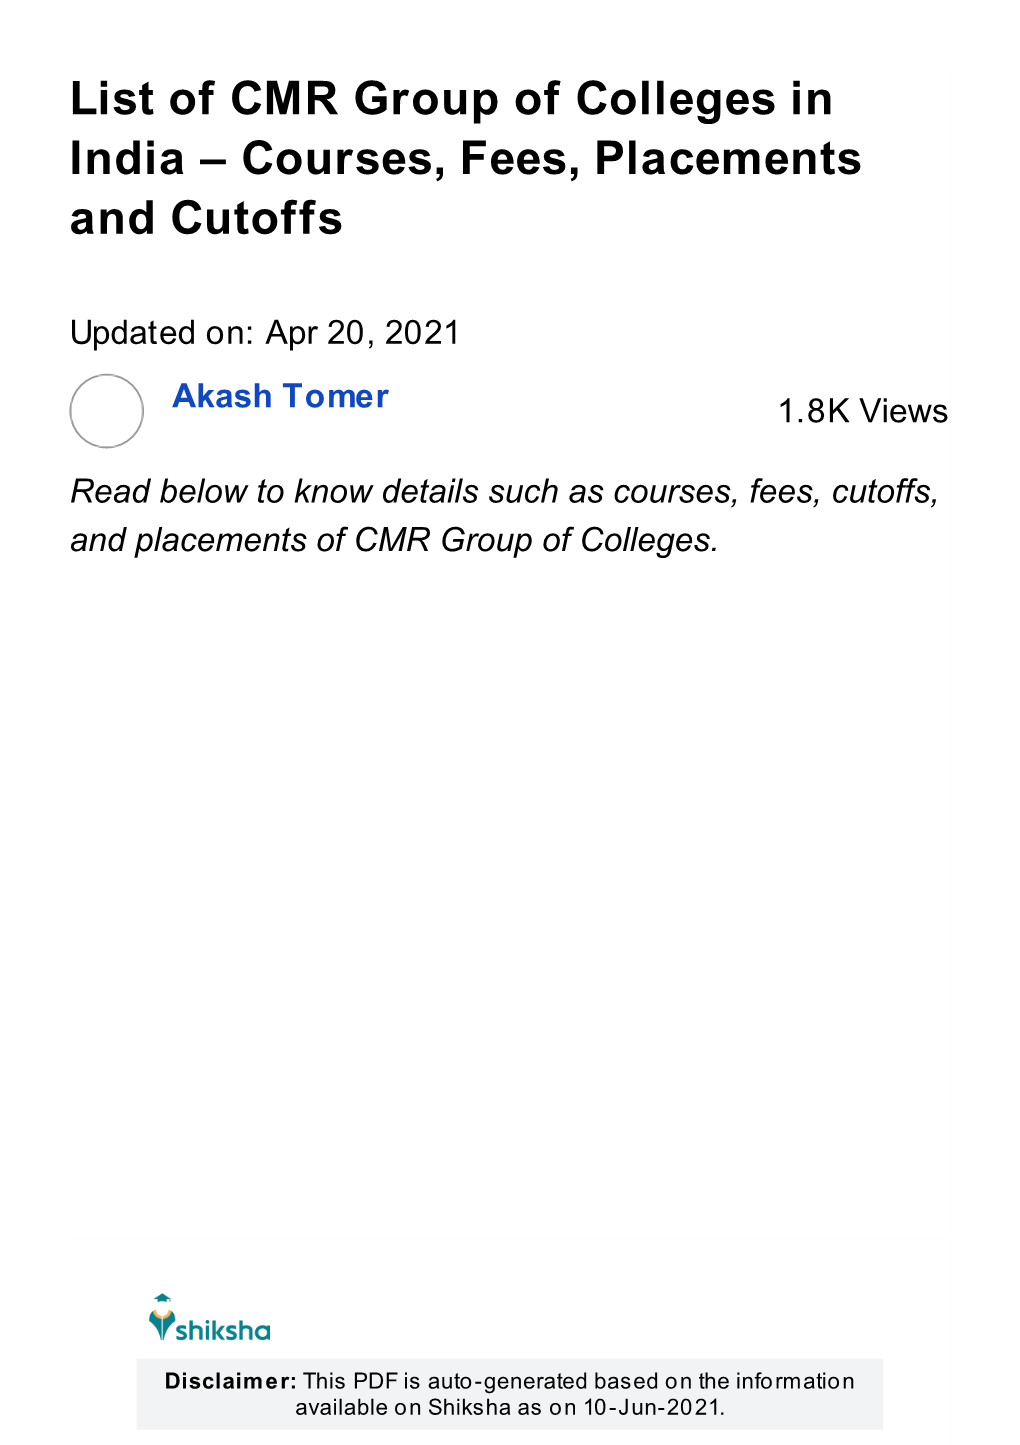 List of CMR Group of Colleges in India – Courses, Fees, Placements and Cutoffs